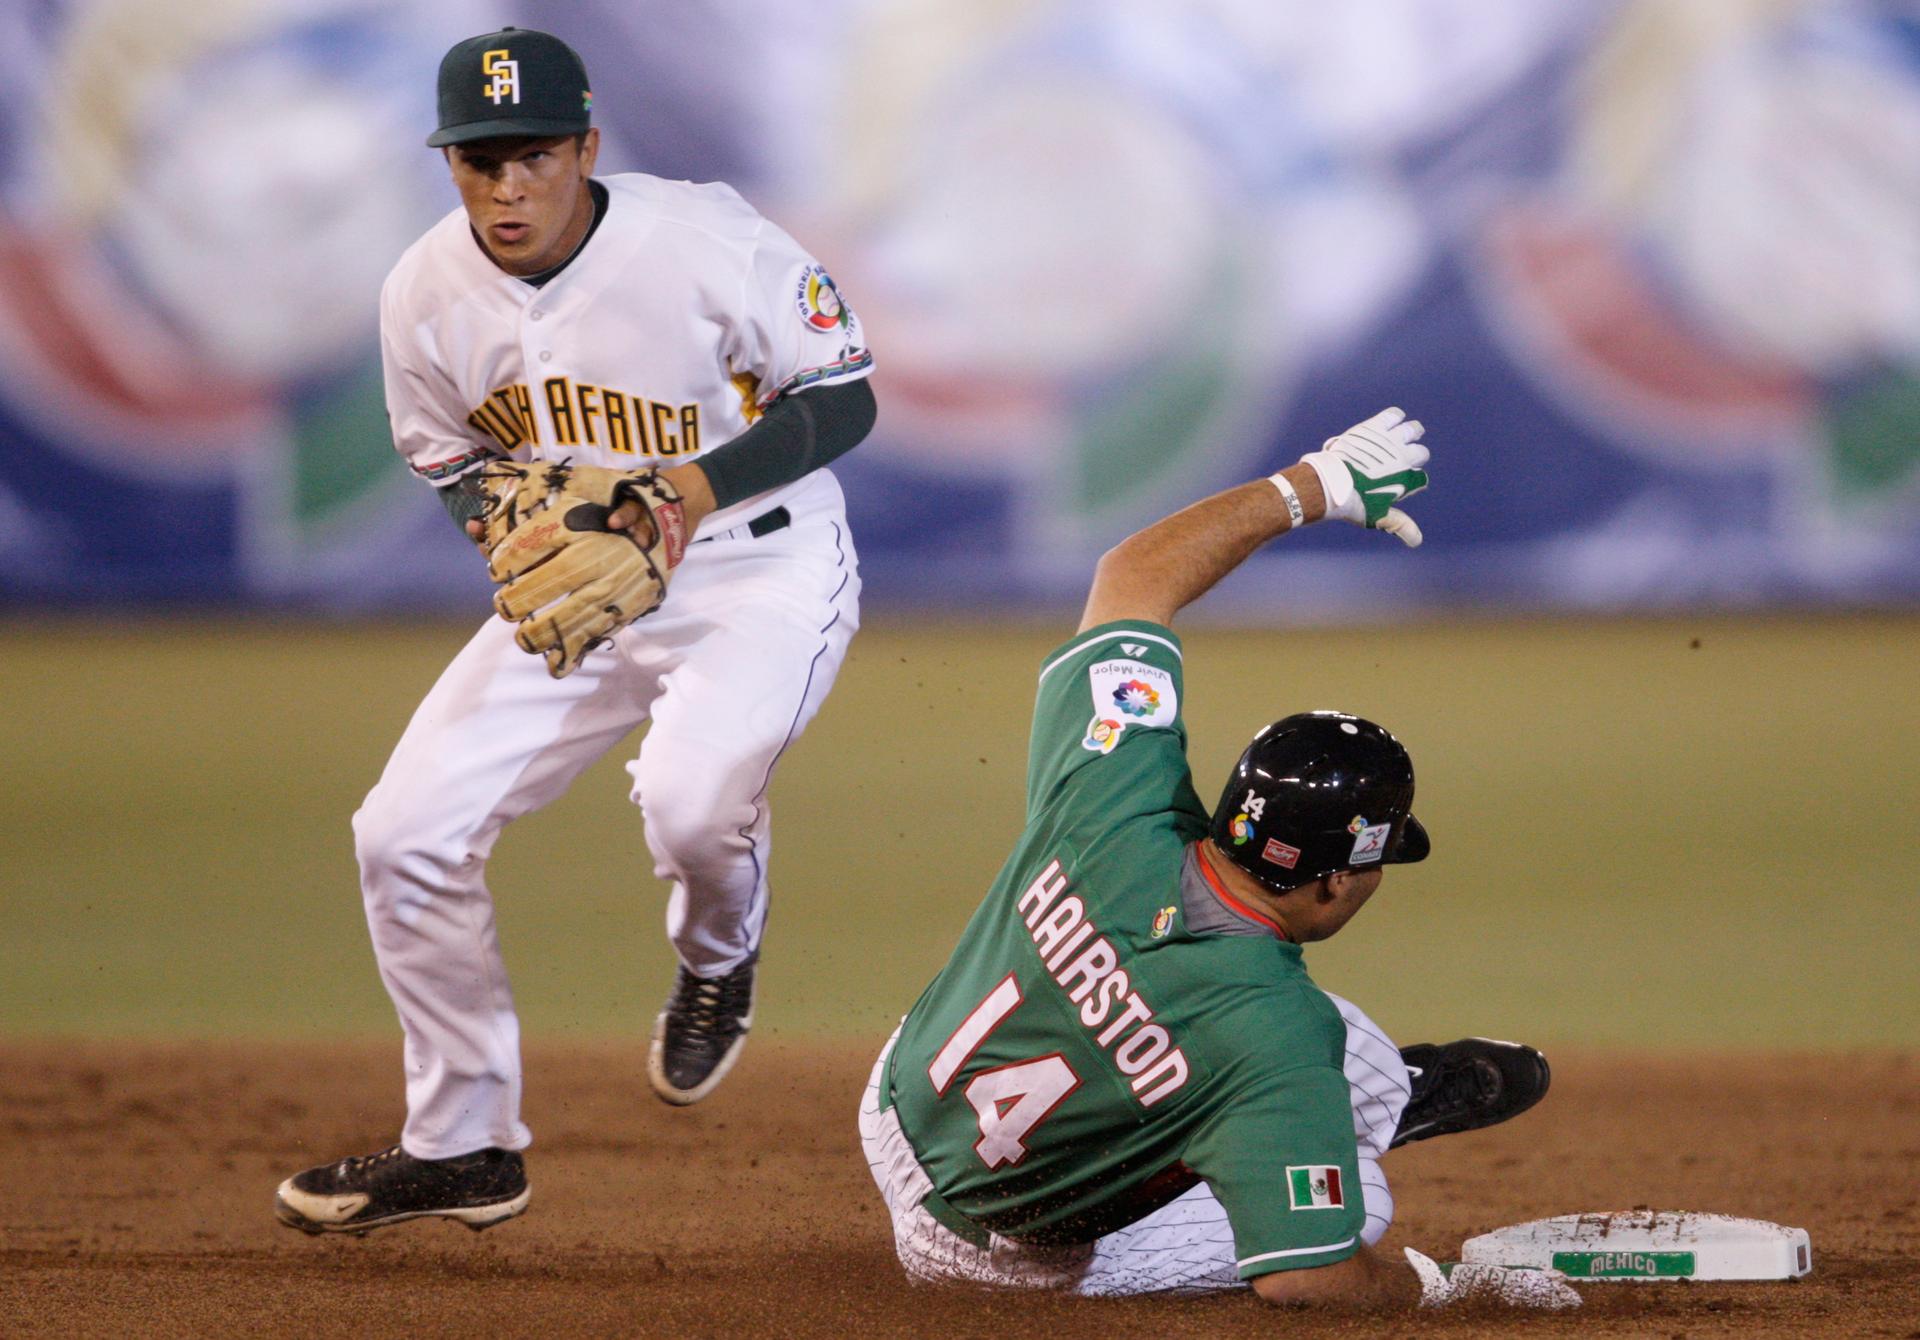 Mexico's Scott Hairston (14) is out at second base as South Africa's Anthony Phillips throws to first base during the first inning of their World Baseball Classic game in Mexico City March 9, 2009.